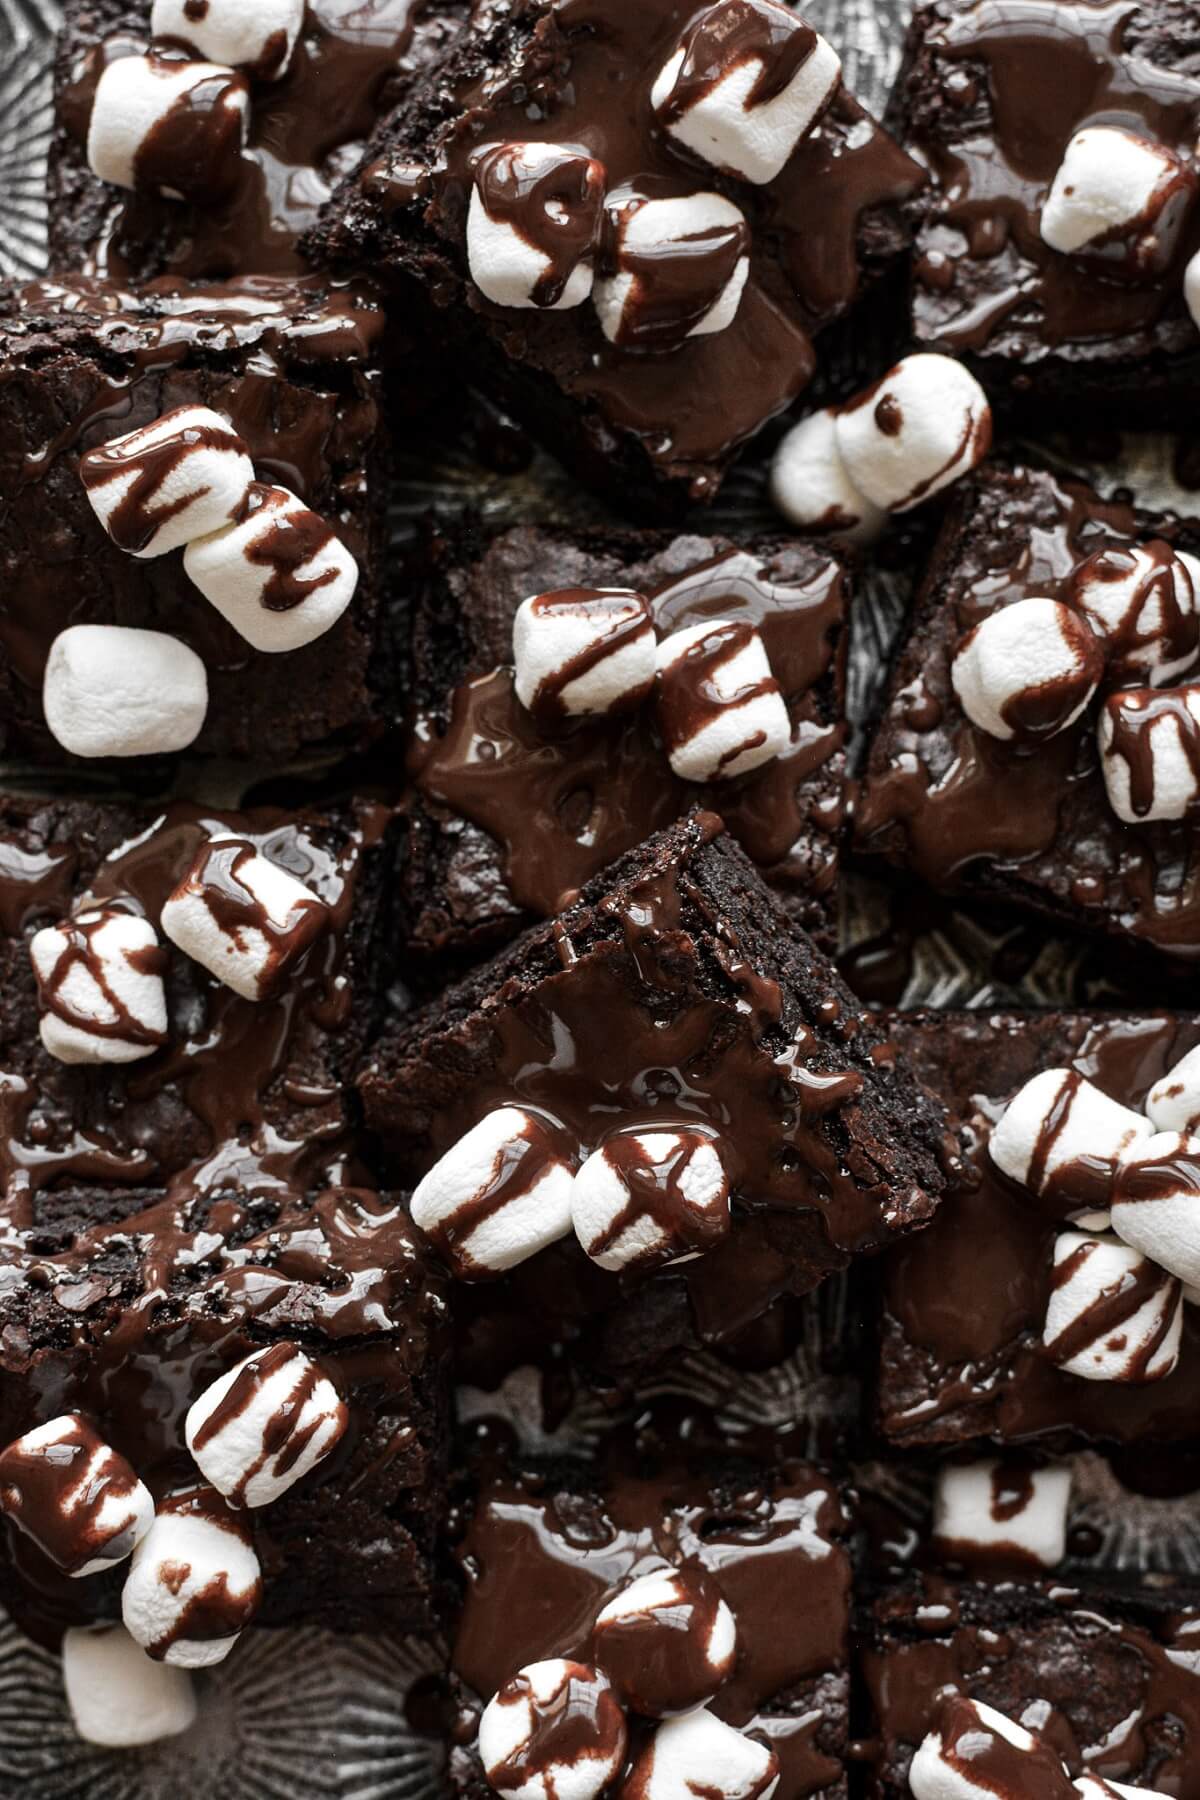 Hot chocolate fudge brownies, sprinkled with mini marshmallows and drizzled with chocolate ganache.